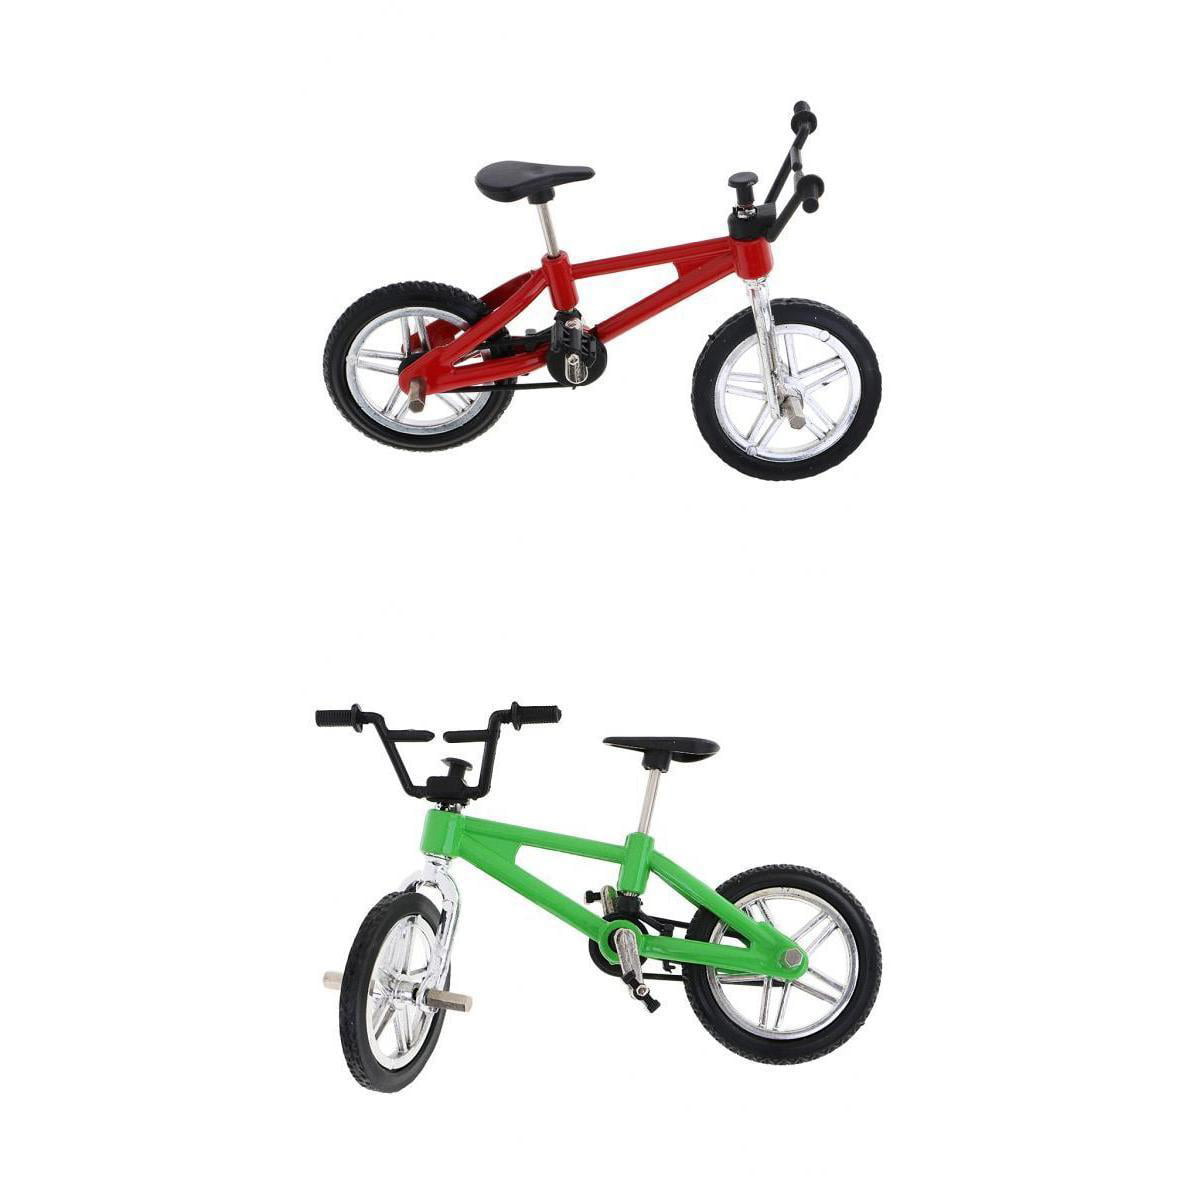 Finger Mountain Bike Bicycle Miniature Metal Toys for Boy Collectible Gift 